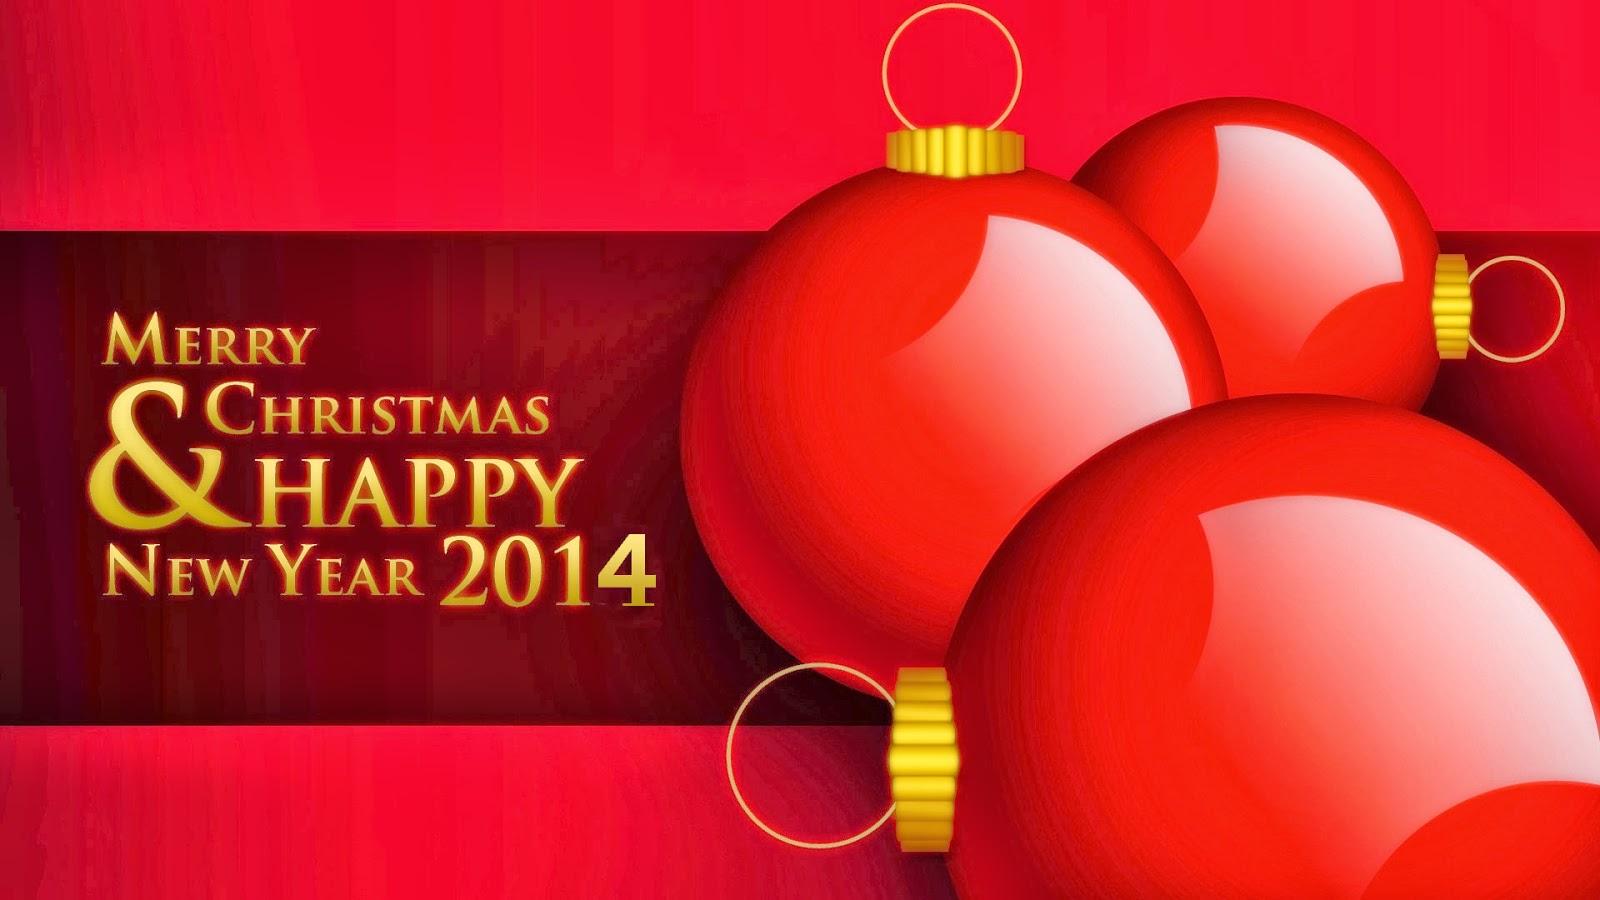 Best New Year 2014 HD Wallpapers for Desktop Screen - New Year ...